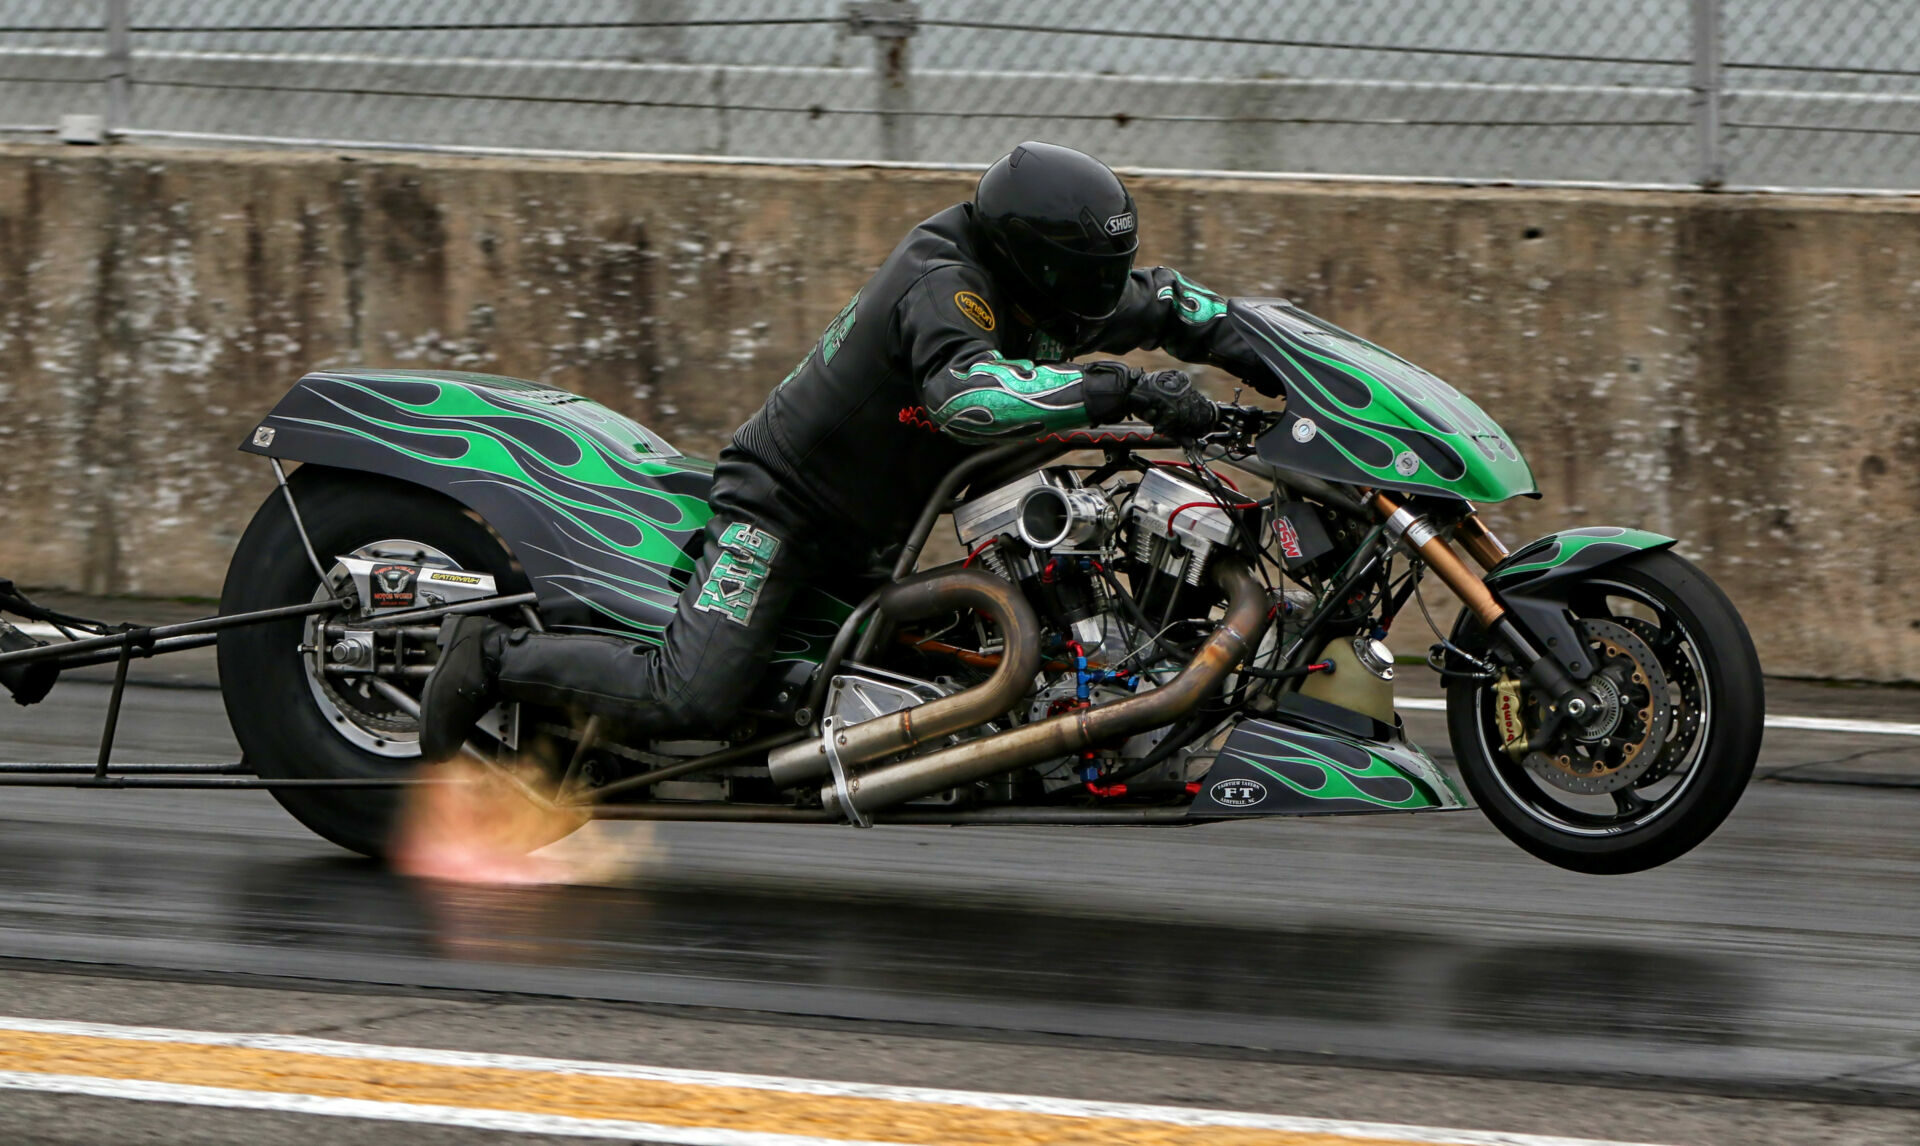 AMA Returns To Drag Racing With All Harley Drag Racing Affiliation